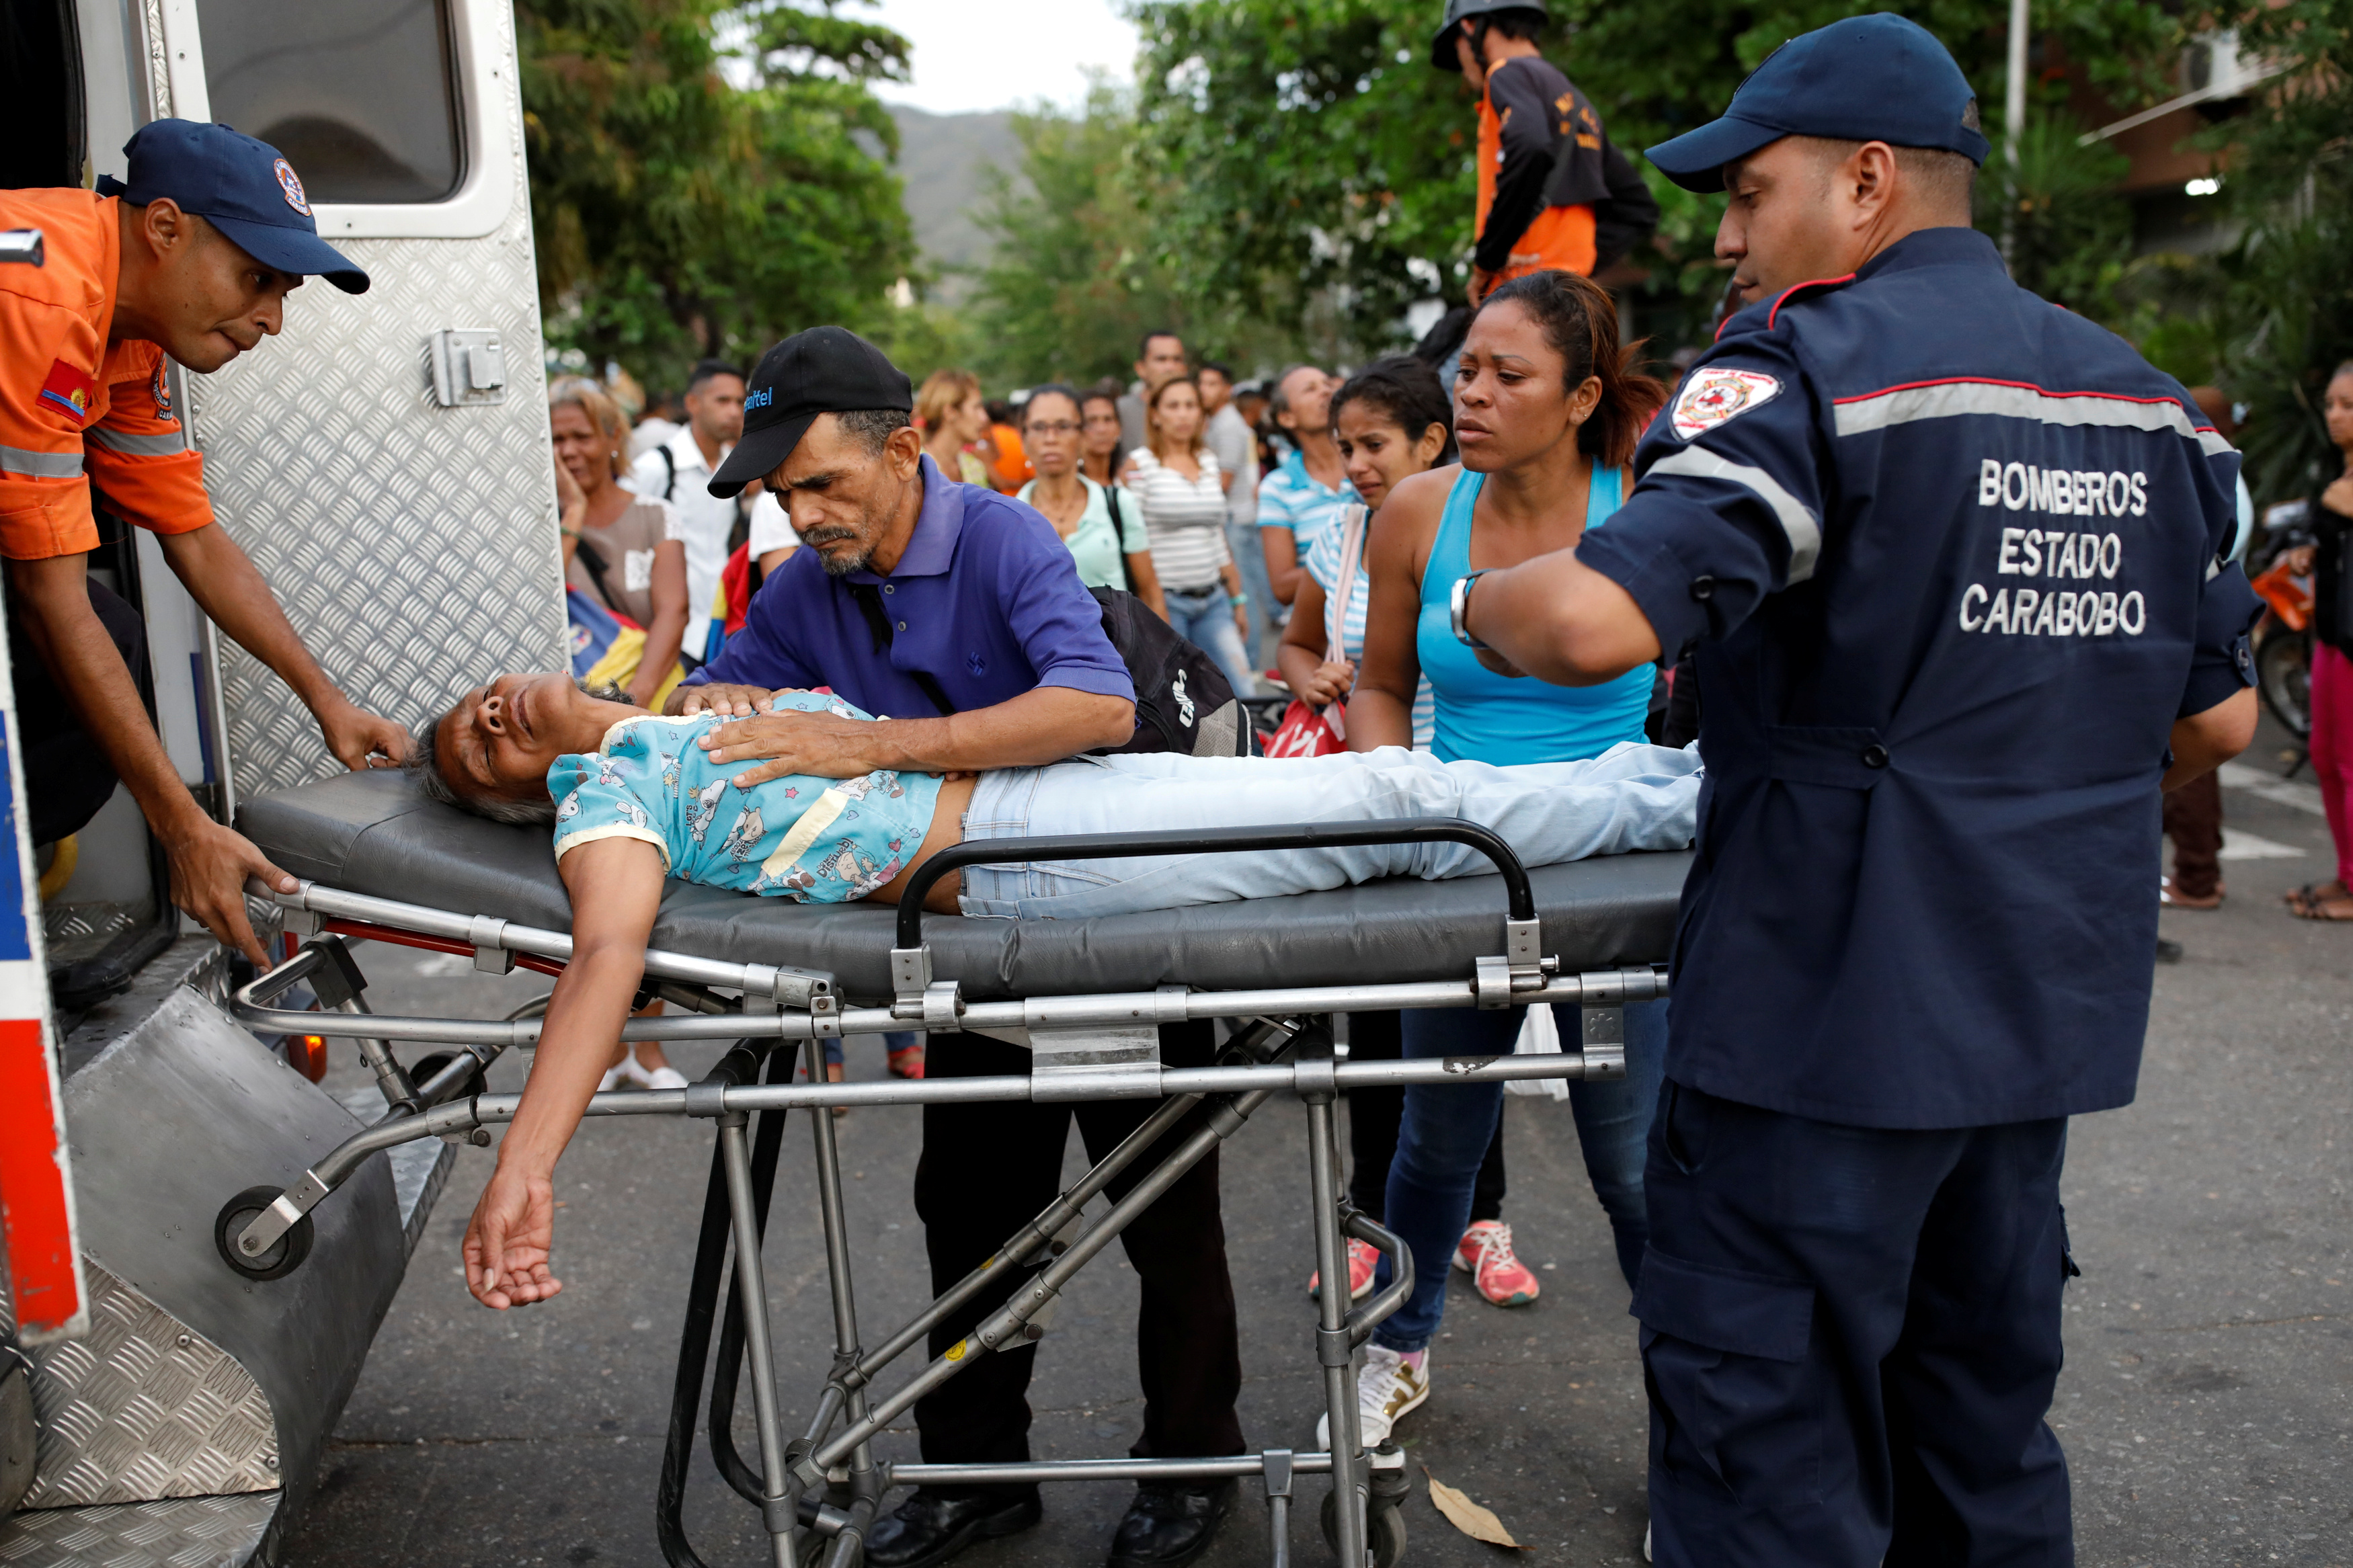 Paramedics help a woman who fainted outside the lockup where a fire occurred in Valencia, Venezuela on March 28, 2018. (Carlos Garcia Rawlins—Reuters)